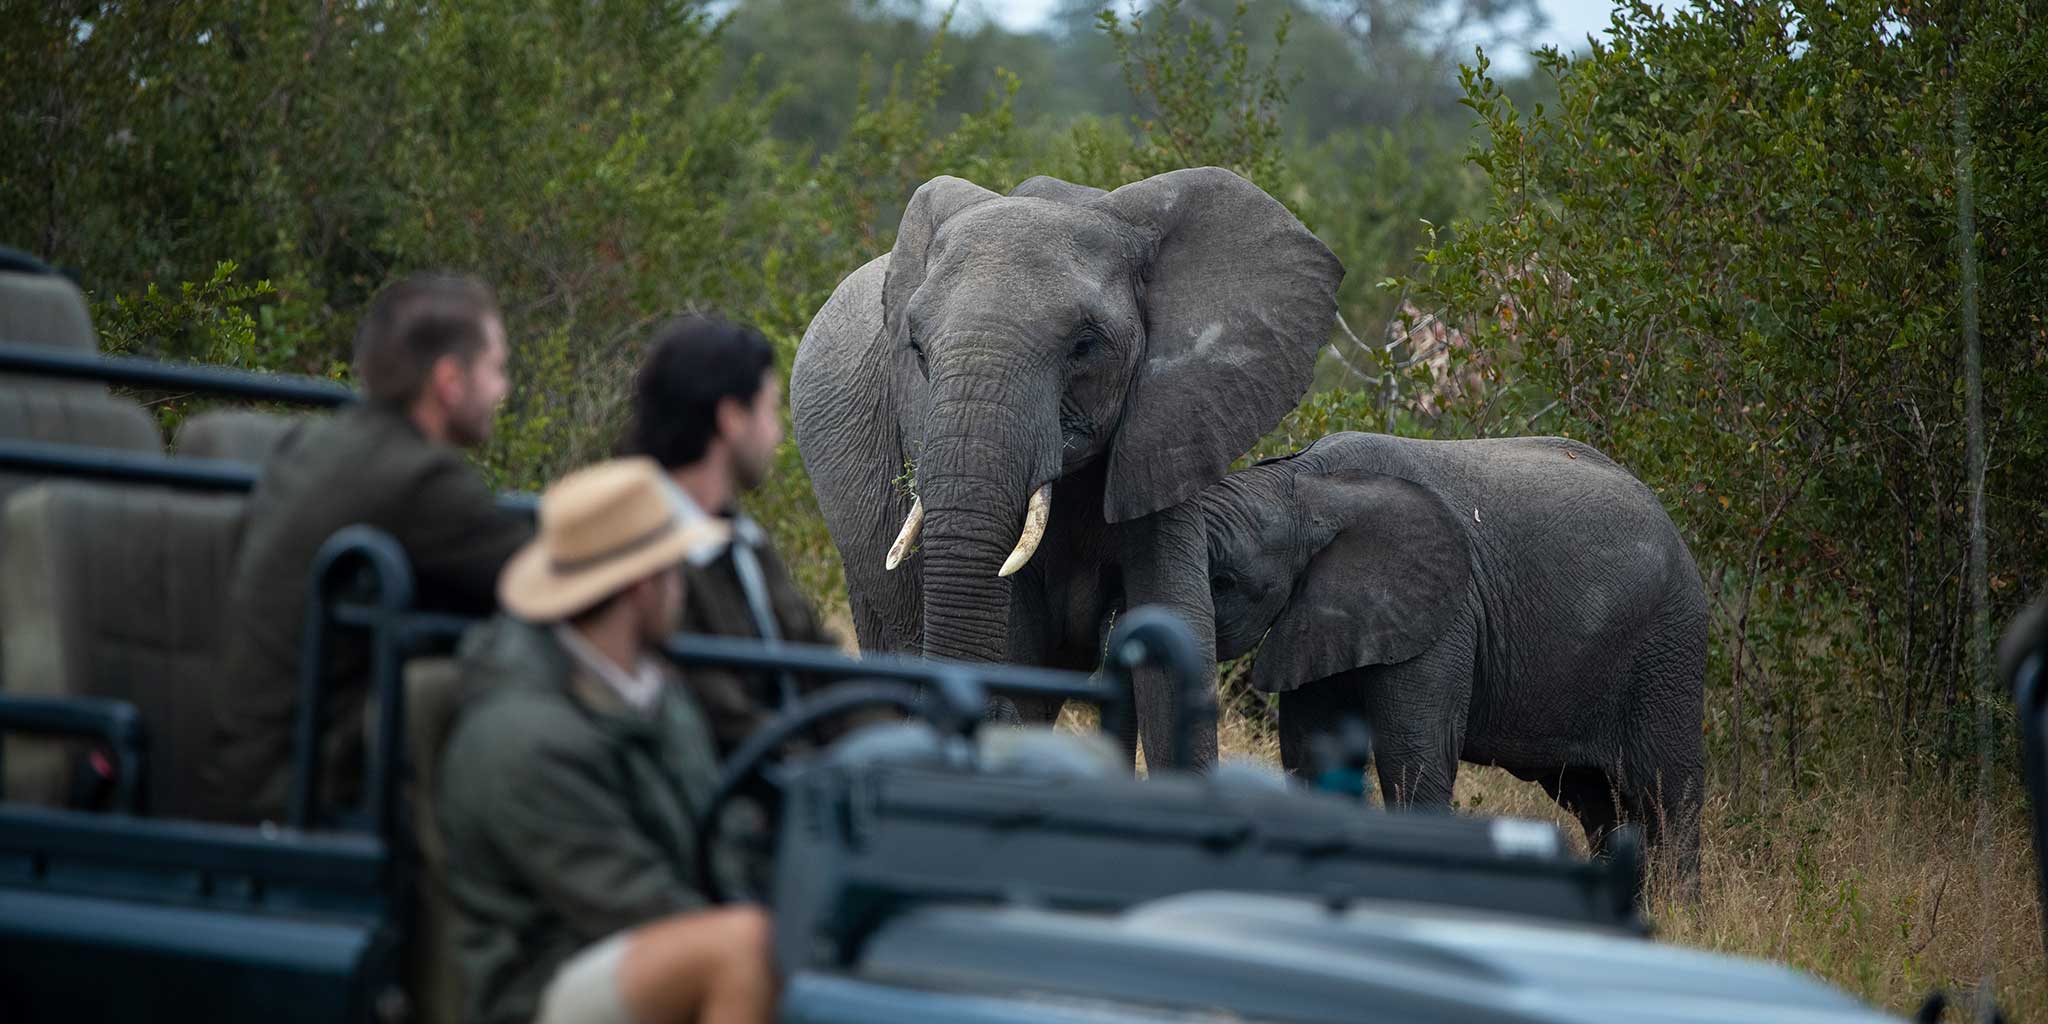 The Kruger National Park is home to Africa’s biggest and greatest animals